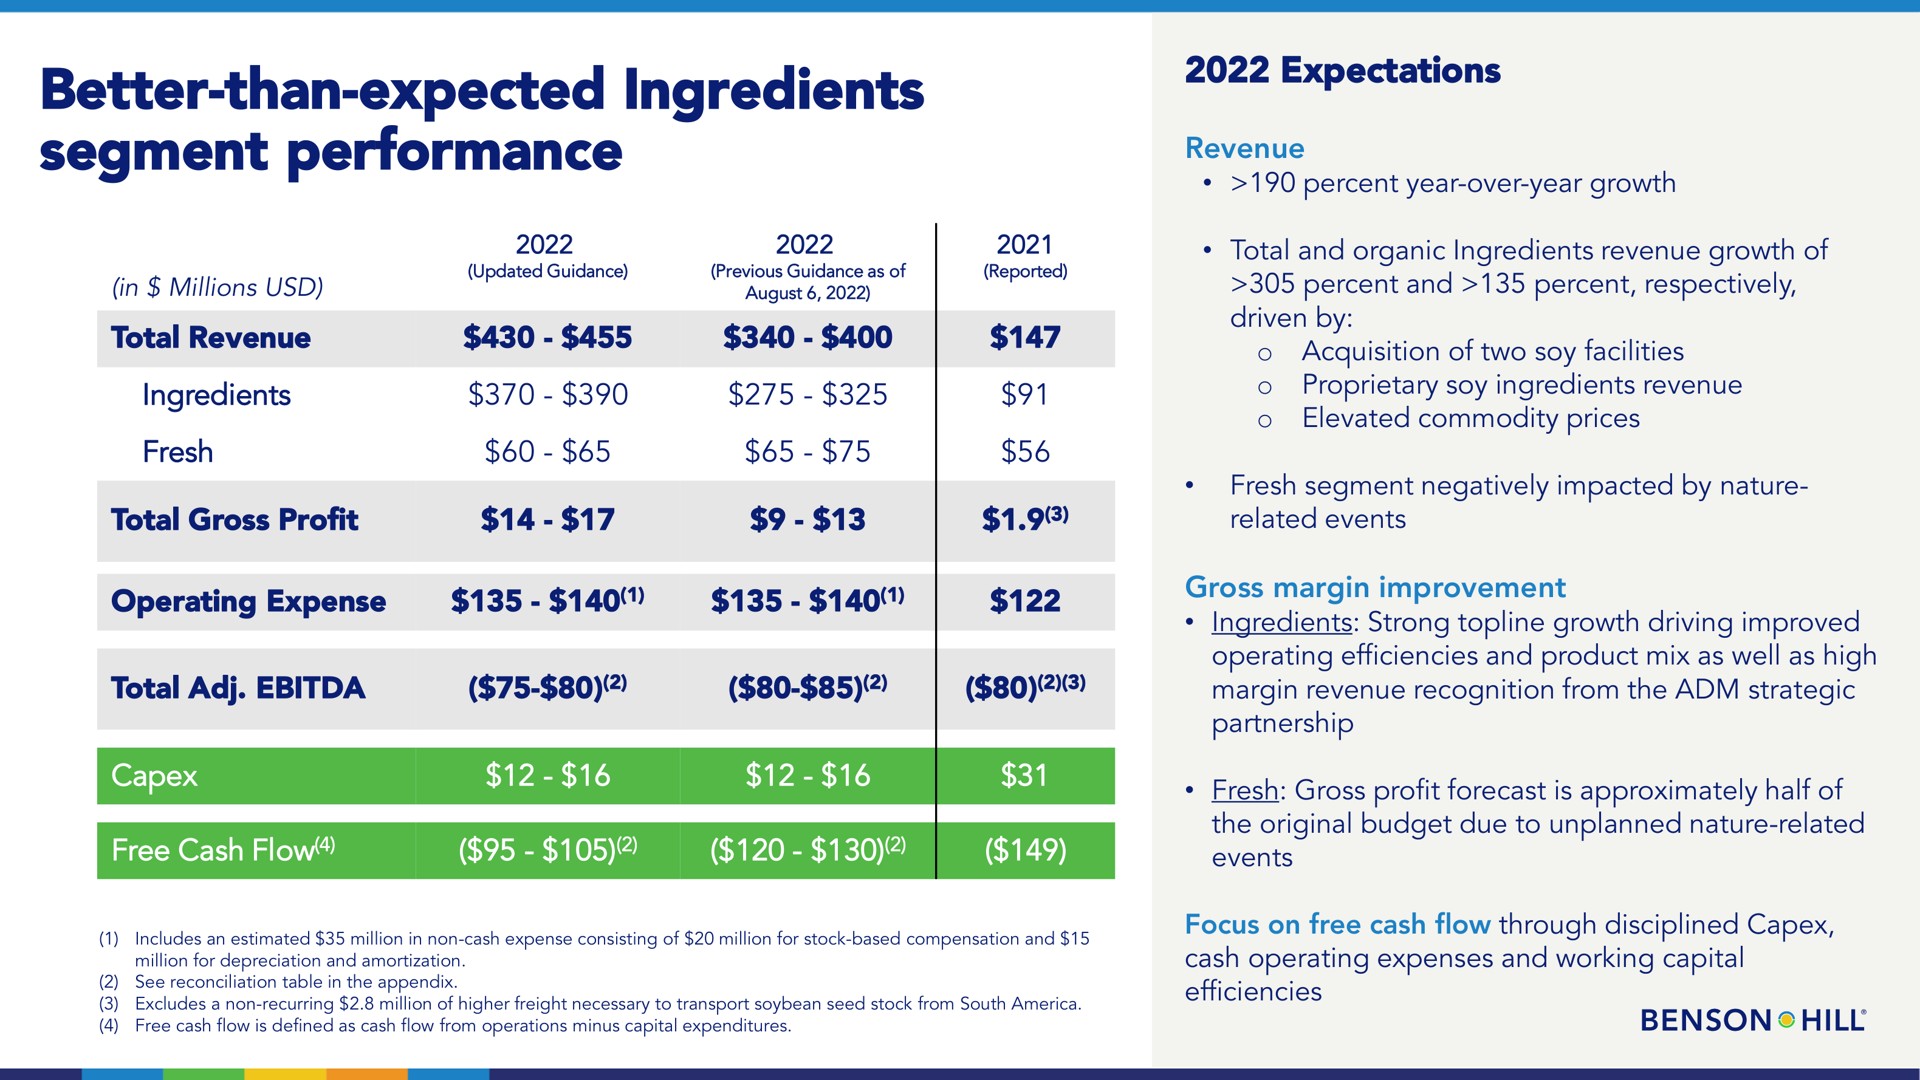 better than expected ingredients segment performance is revenue | Benson Hill